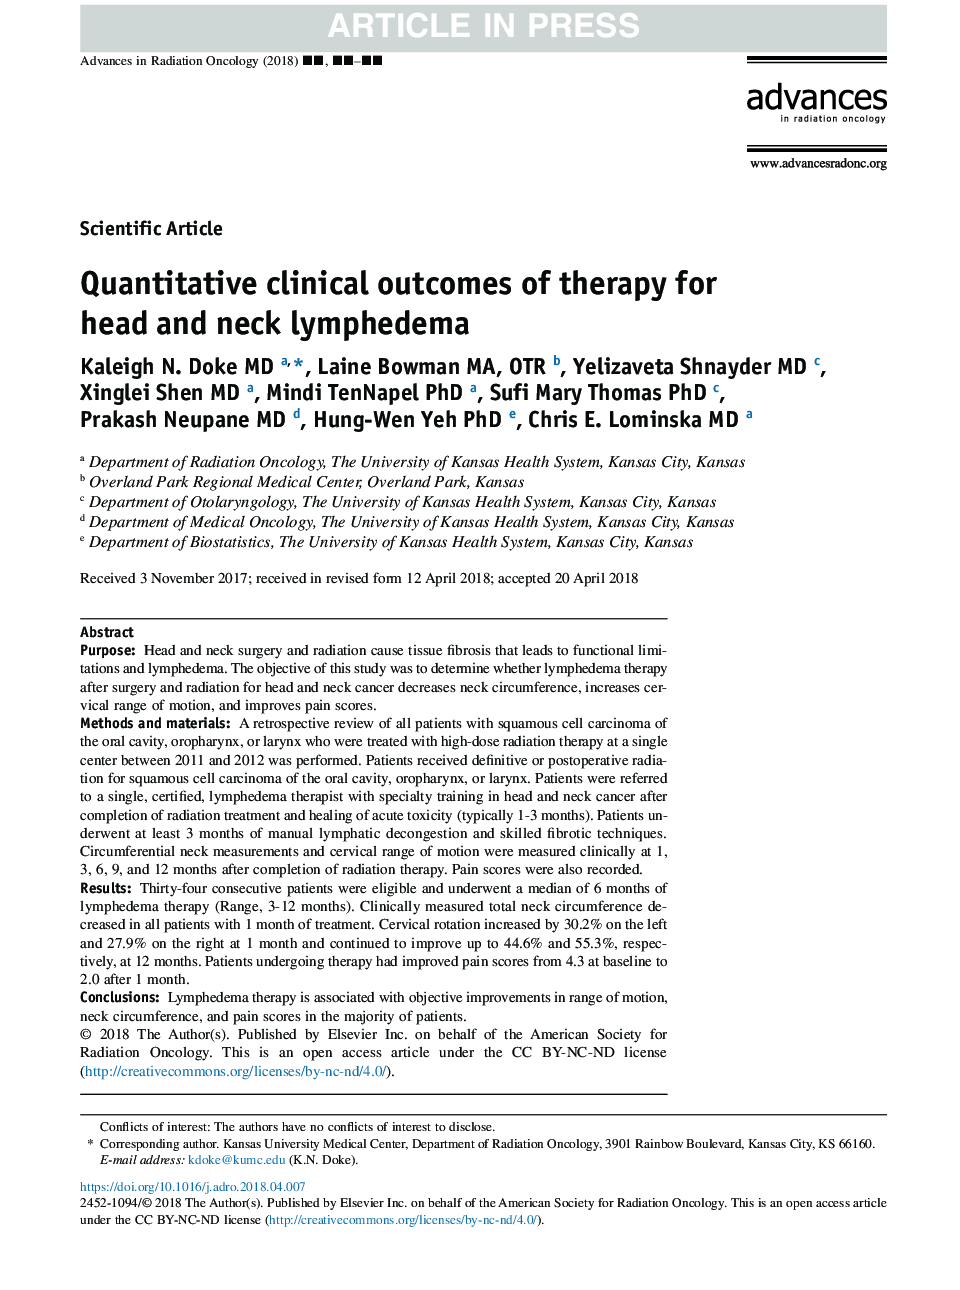 Quantitative clinical outcomes of therapy for head and neck lymphedema